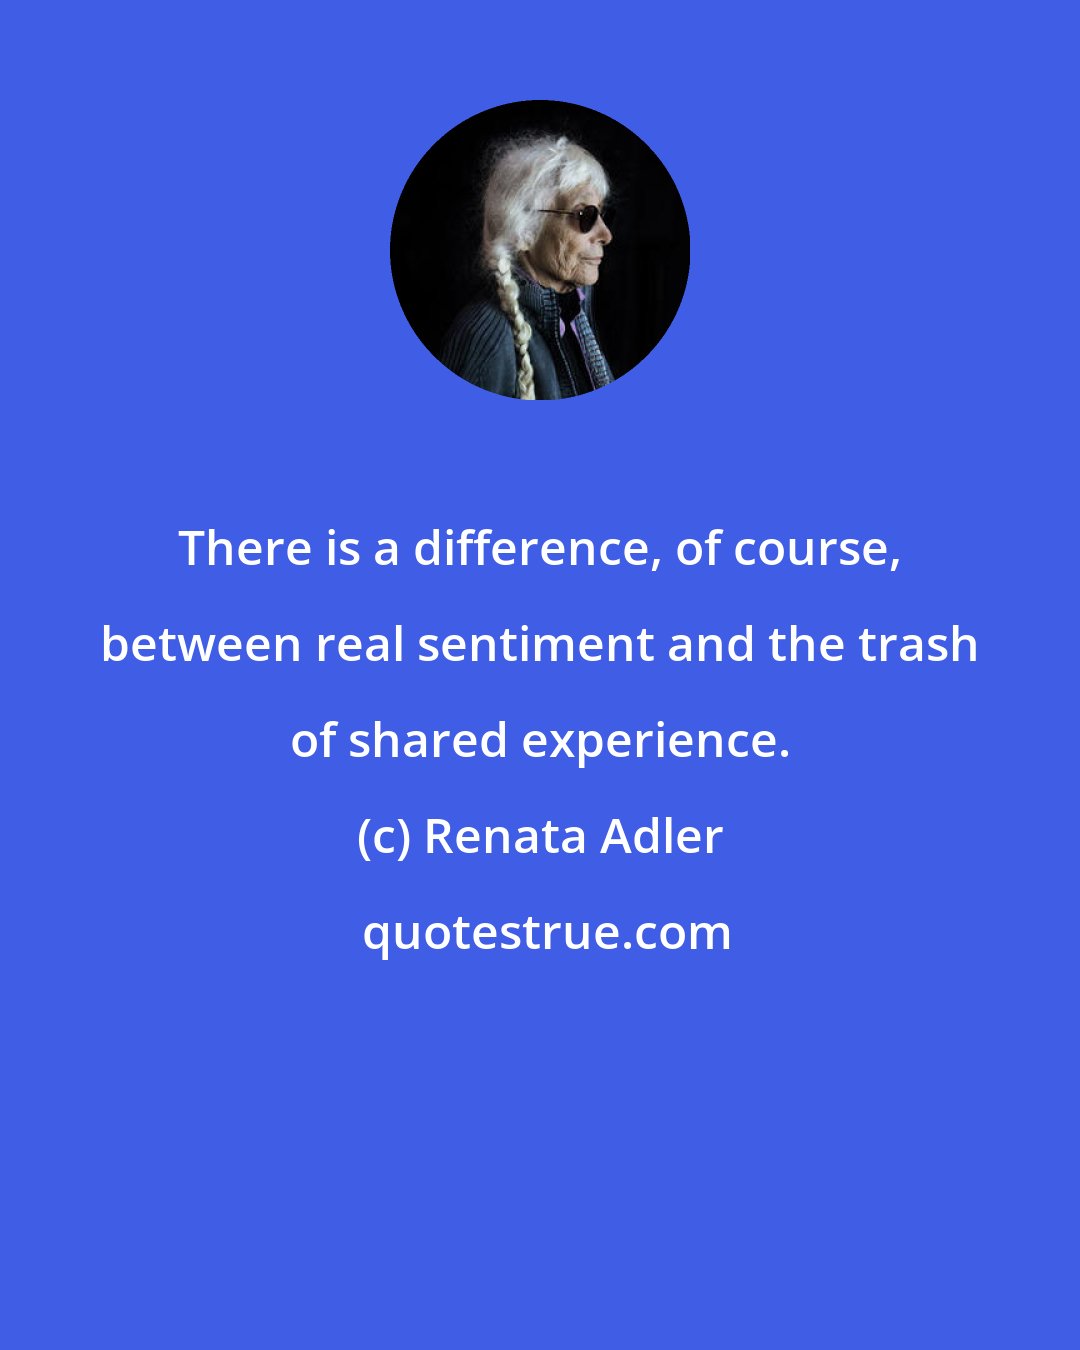 Renata Adler: There is a difference, of course, between real sentiment and the trash of shared experience.